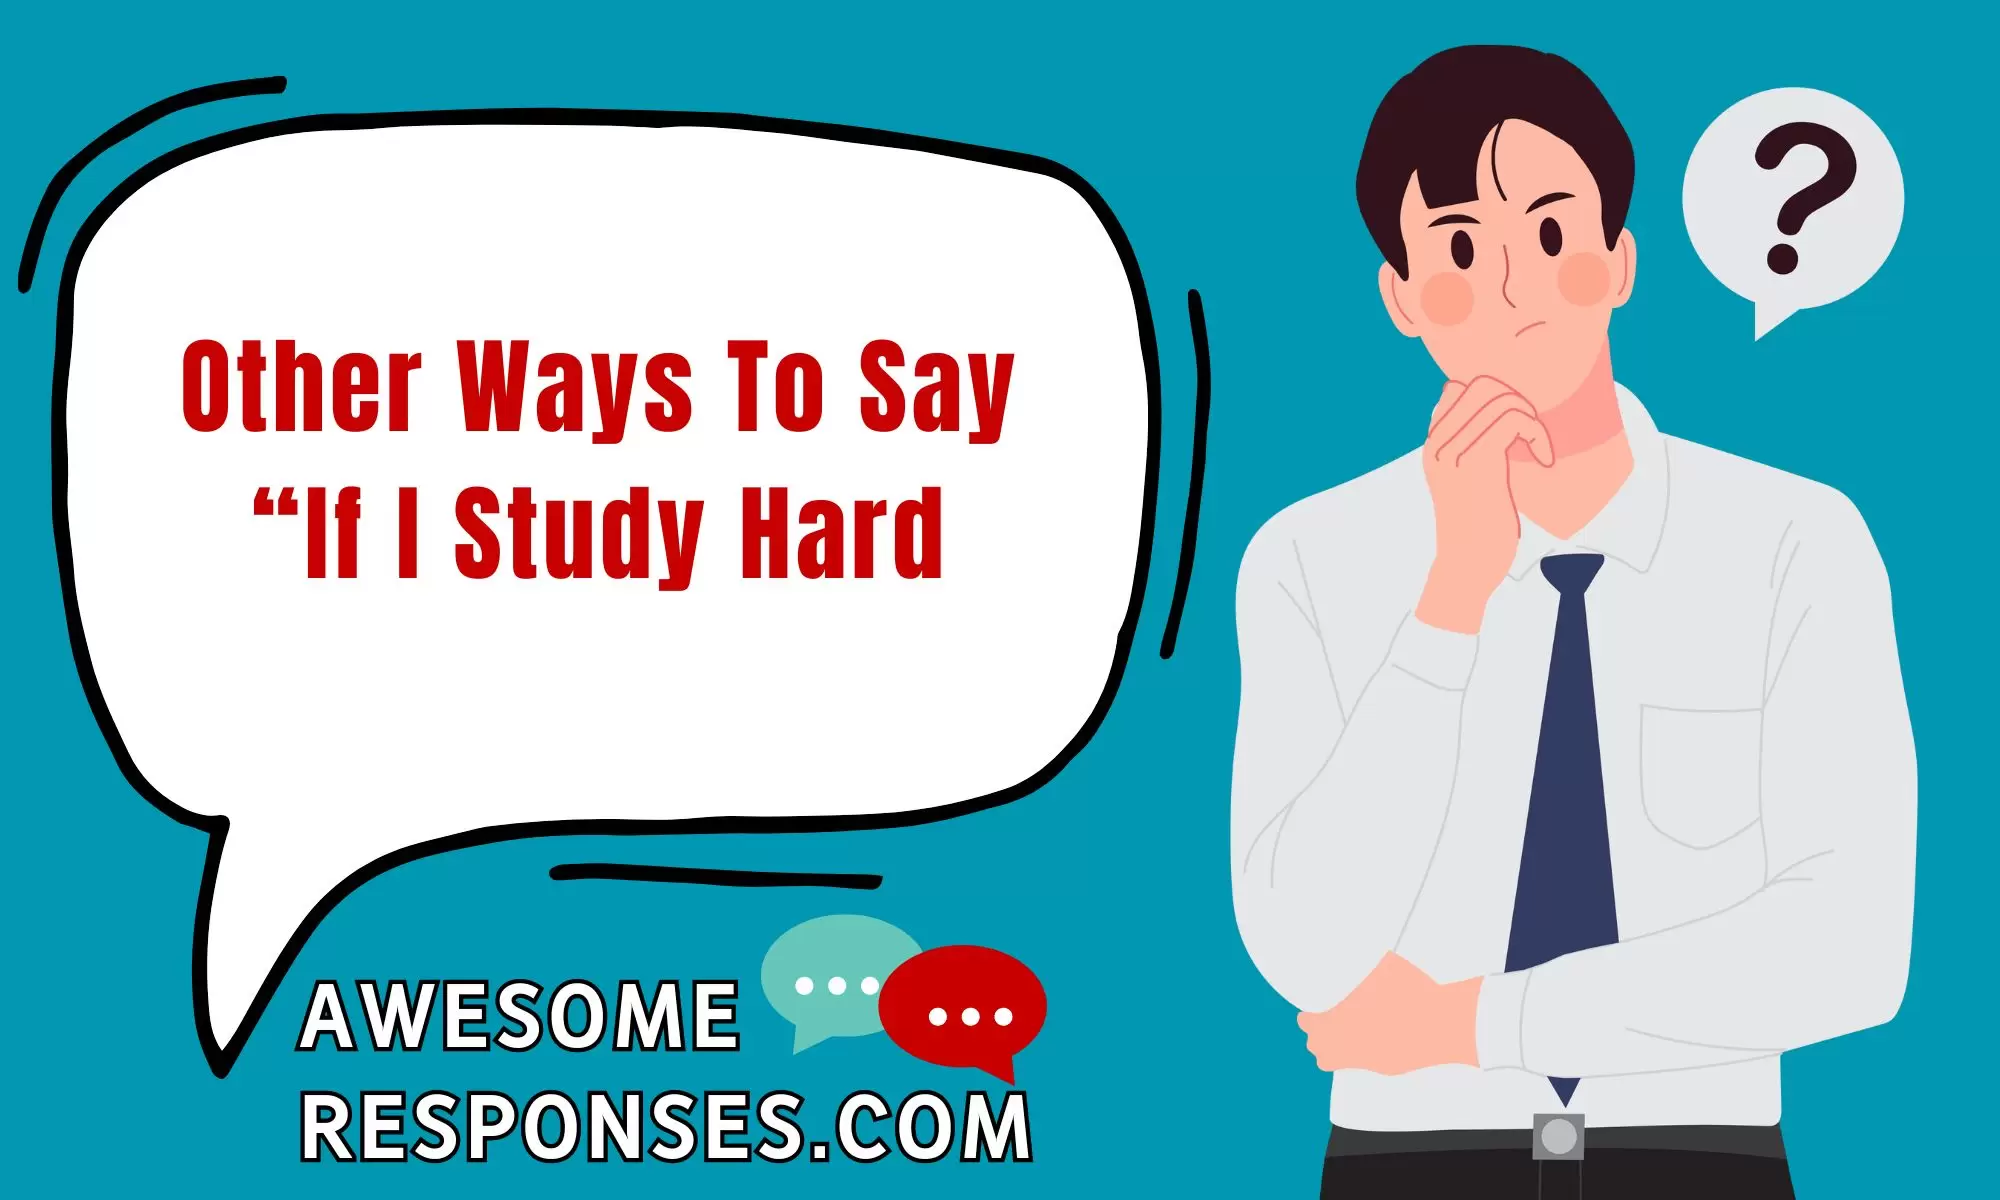 Other Ways To Say “If I Study Hard